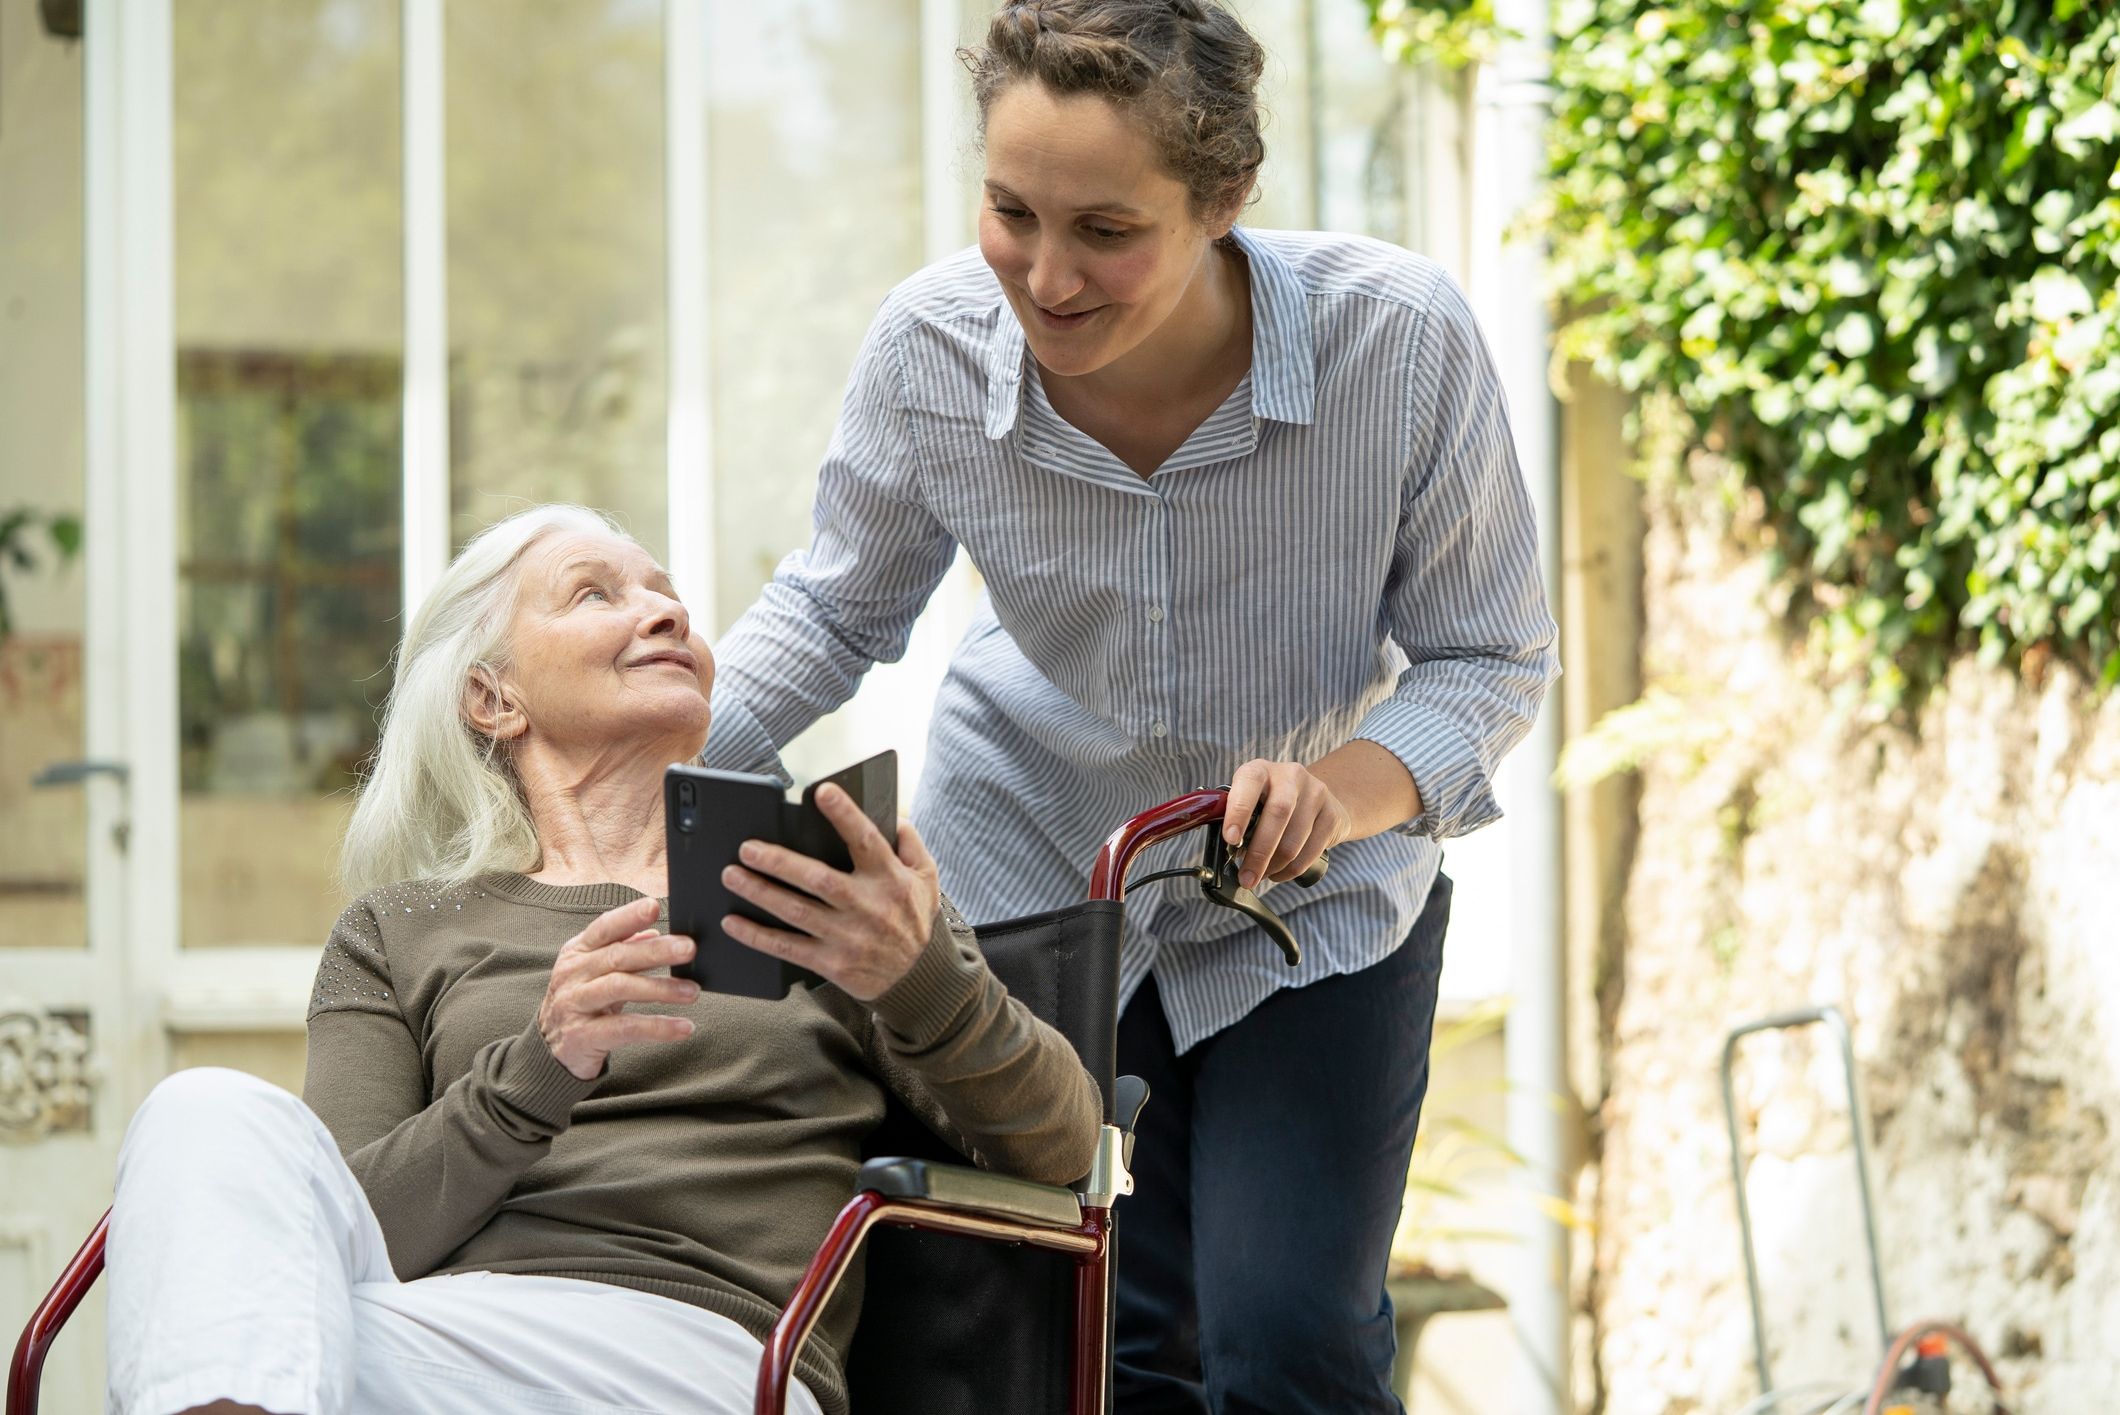 Elderly care contracts: Why you need one and what to include in it